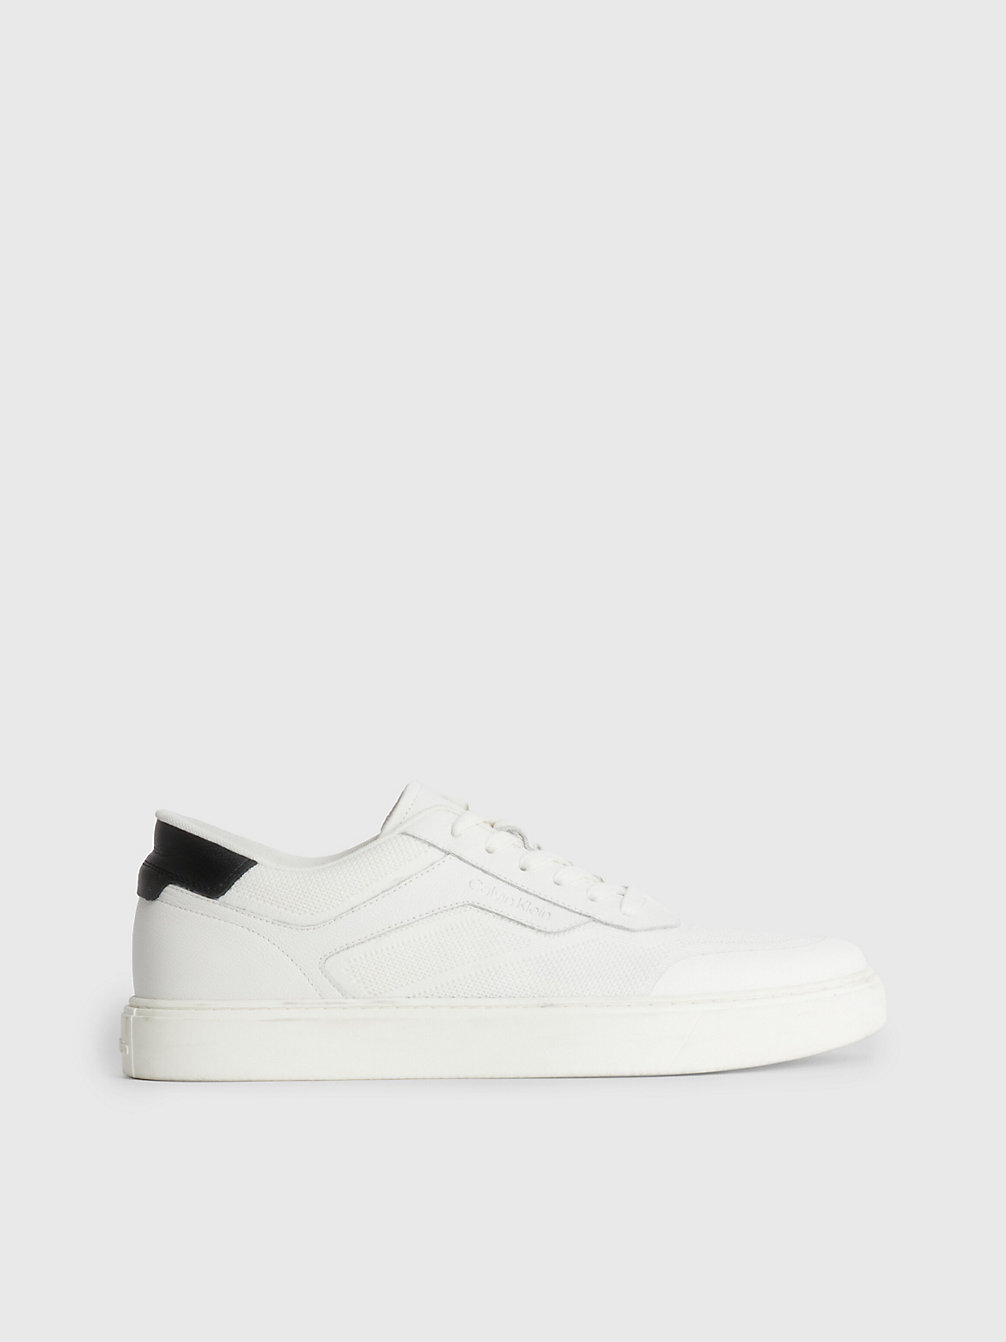 WHITE / BLACK Leather And Knit Trainers undefined men Calvin Klein